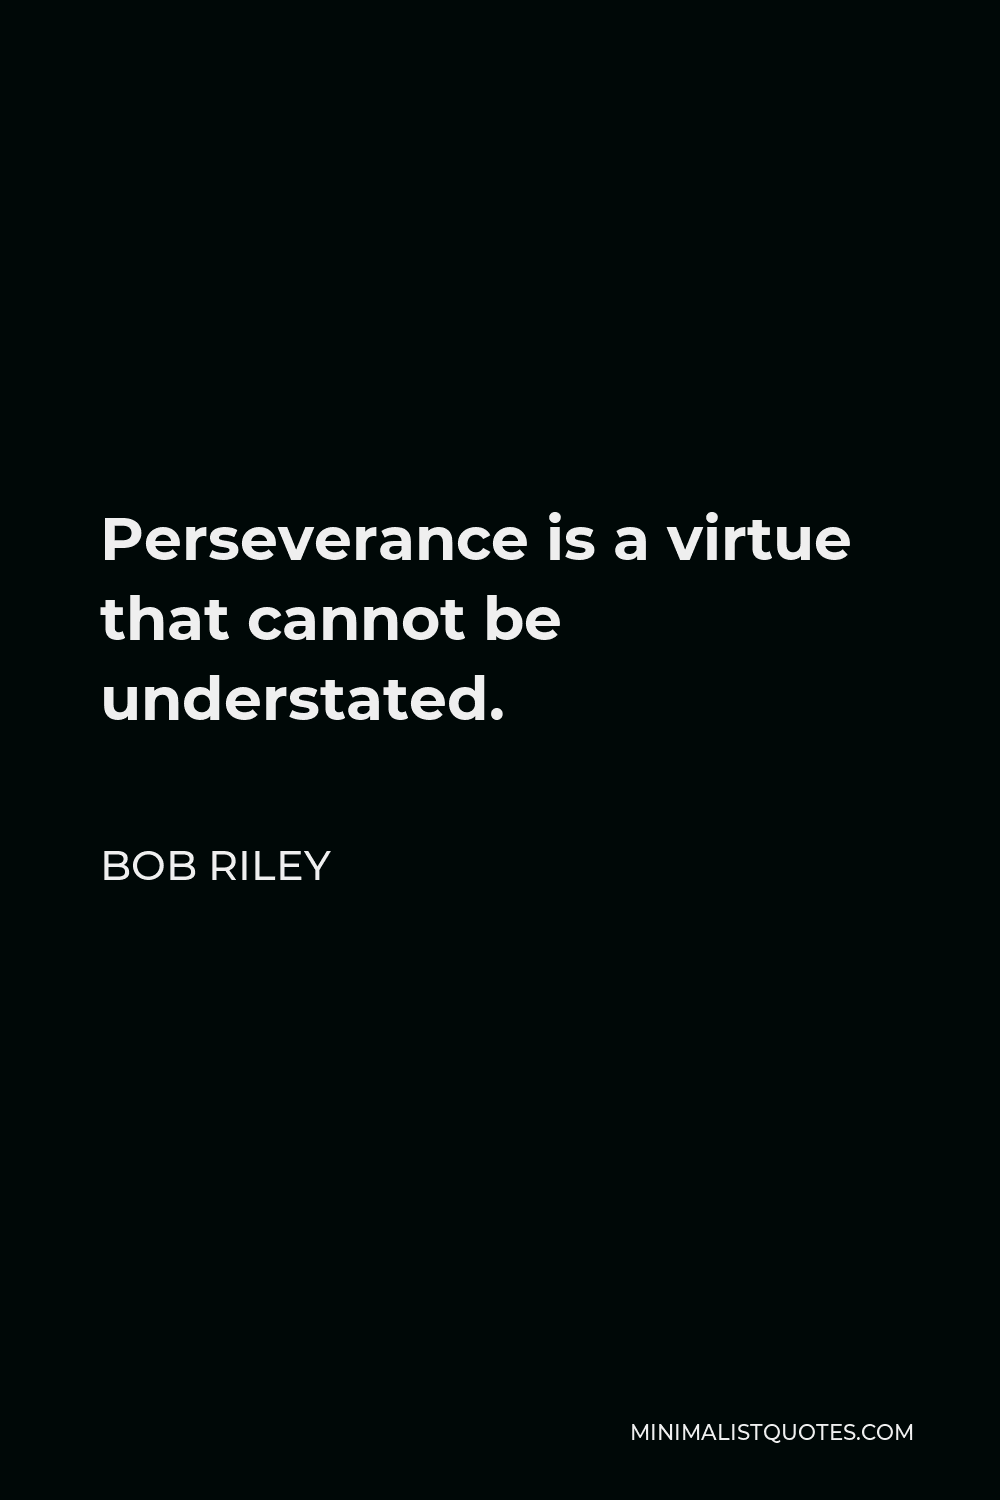 Bob Riley Quote - Perseverance is a virtue that cannot be understated.